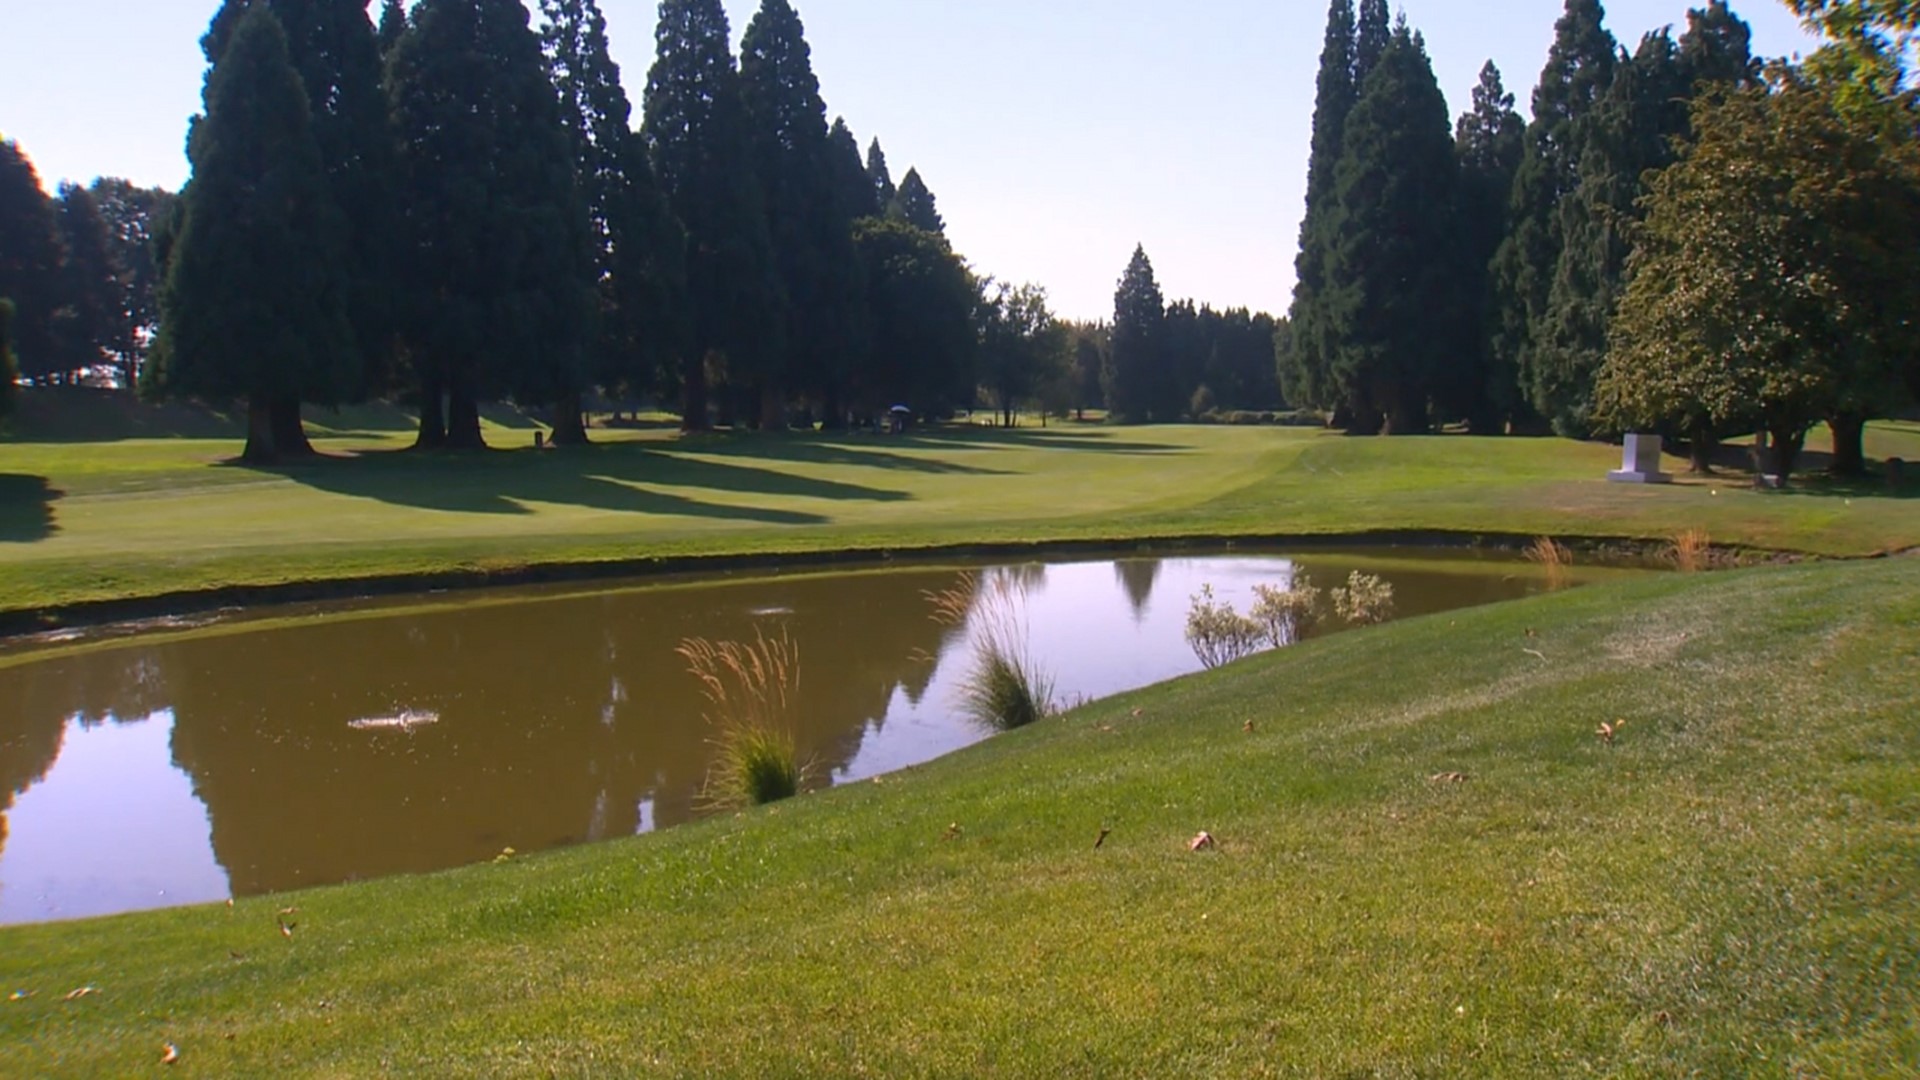 KGW's Rod Hill visits Columbia Edgewater Country Club, where the LPGA is setting up shop for the Portland Classic from Thursday, Sept. 15 through Sunday, Sept. 18.